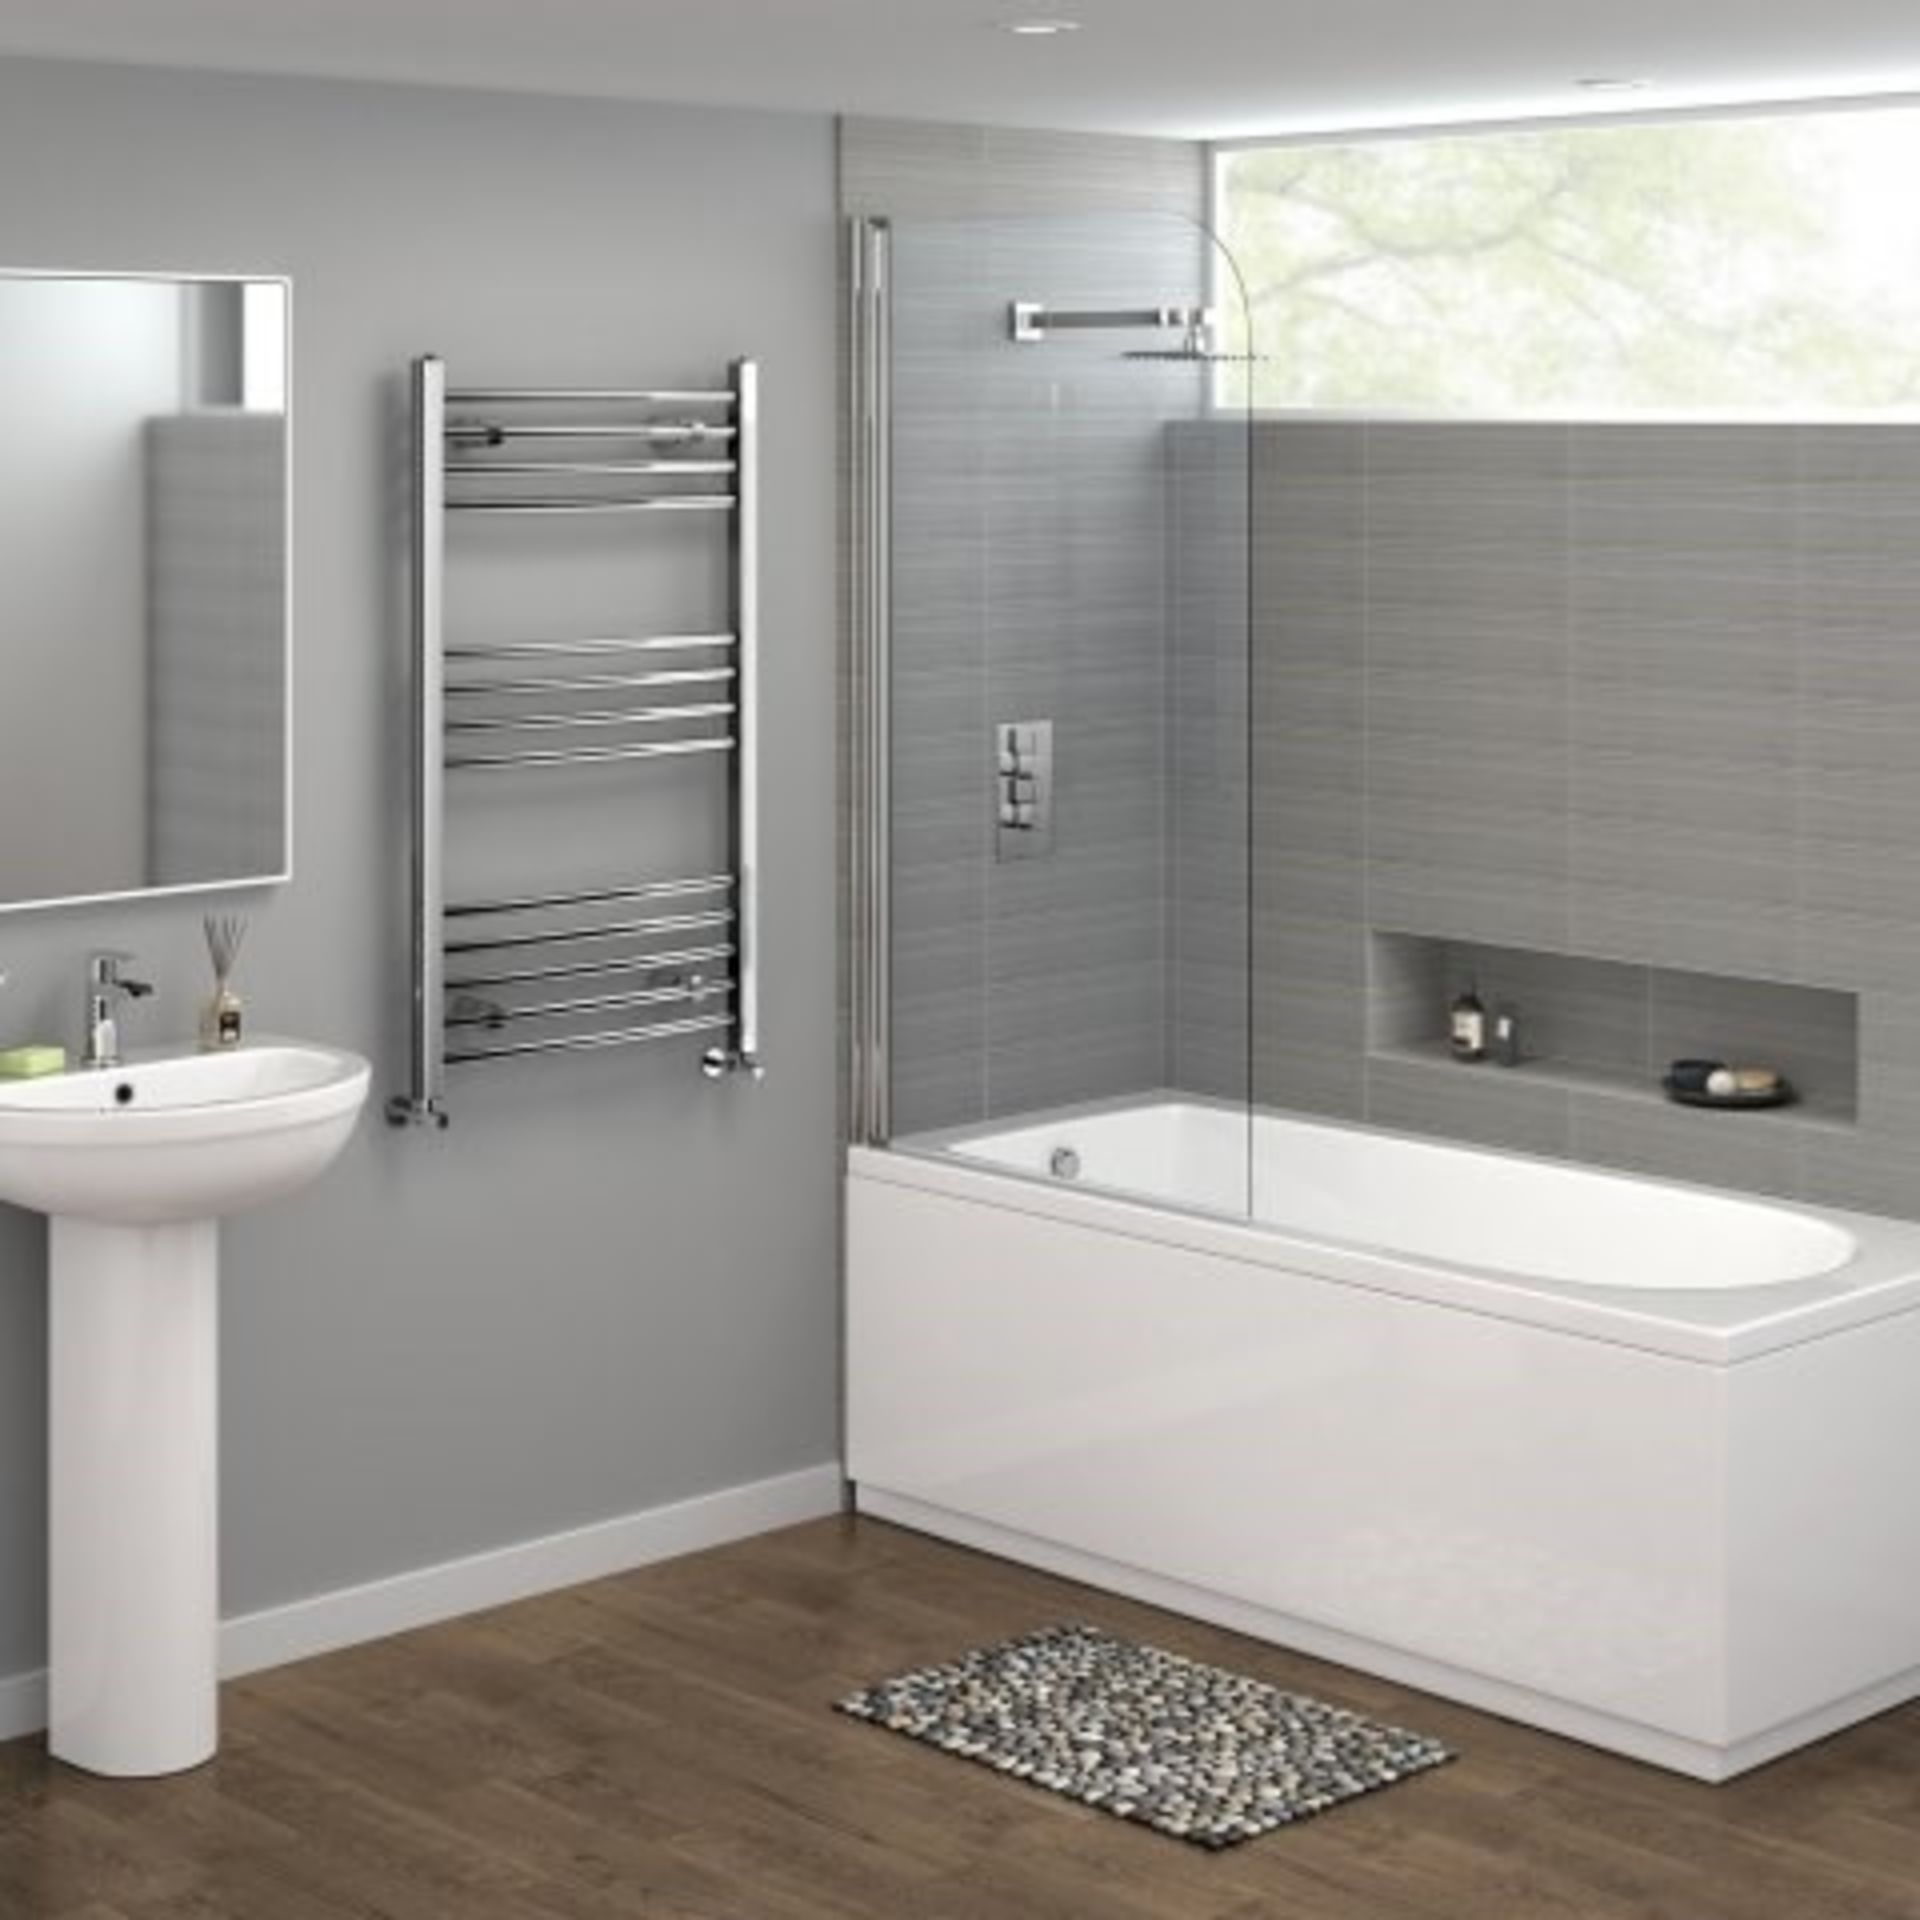 BRAND NEW BOXED 1200x600mm - 20mm Tubes - RRP £219.99.Chrome Curved Rail Ladder Towel Radiator.Our - Image 2 of 2